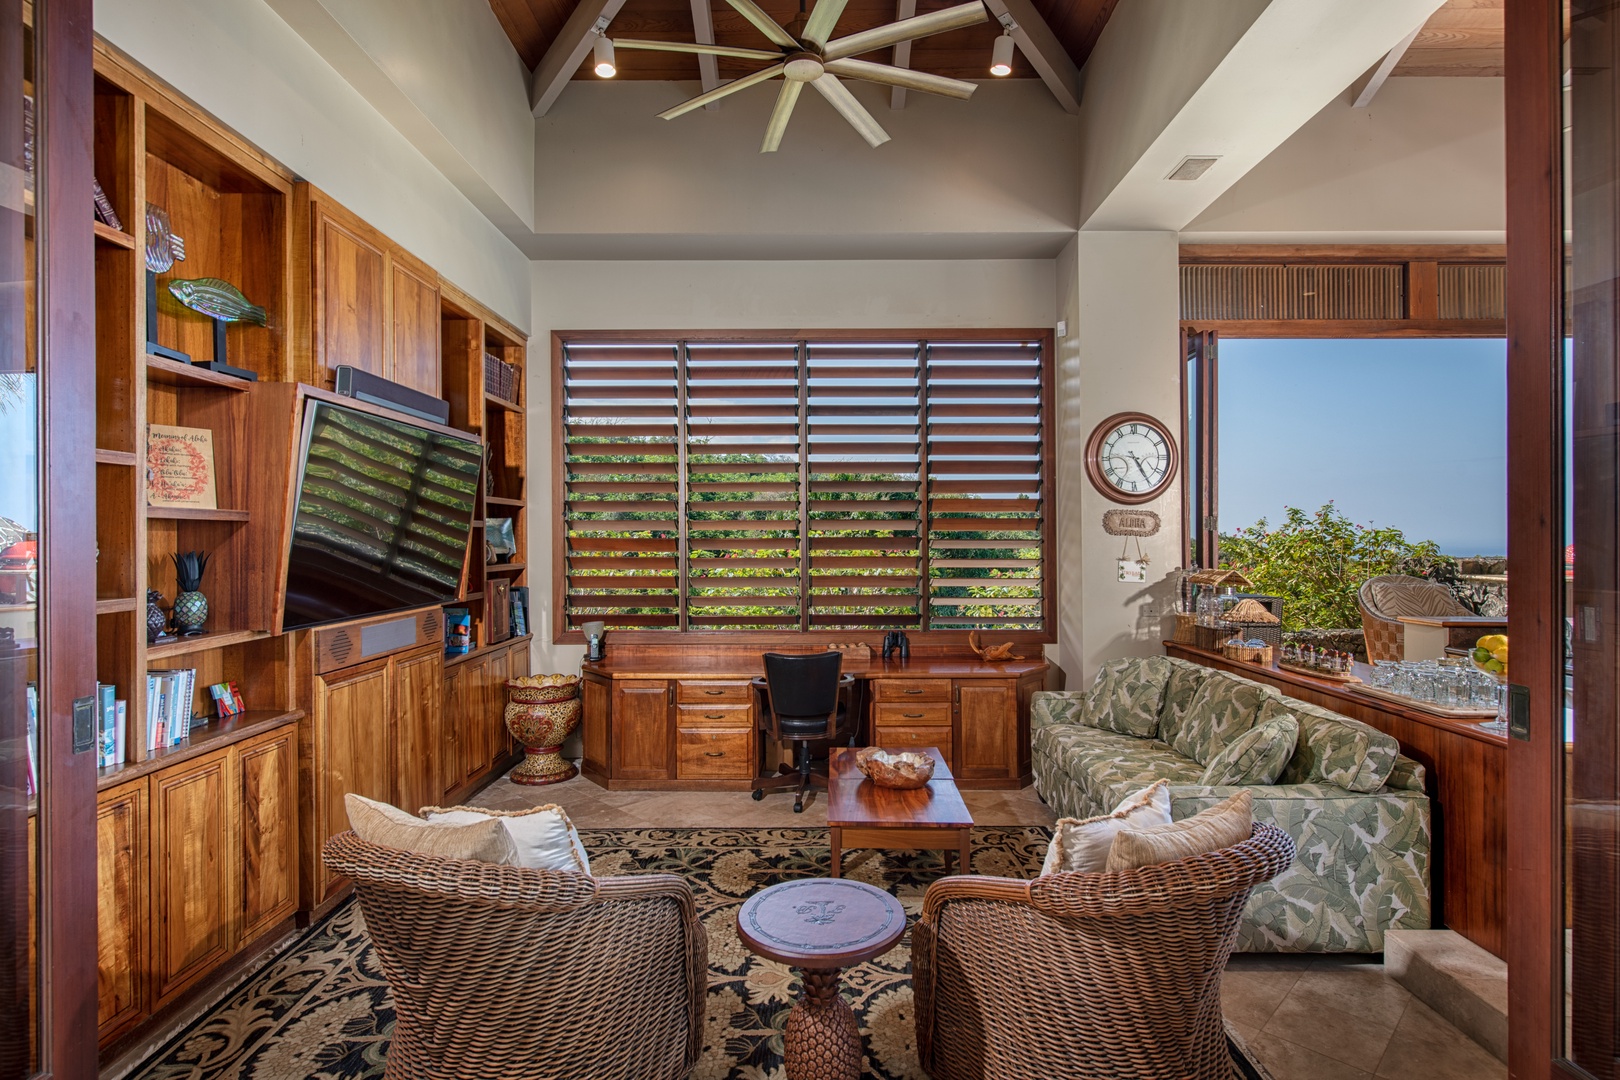 Kailua Kona Vacation Rentals, Hale Wailele** - Professionally designed and offer a luxurious yet comfortable respite